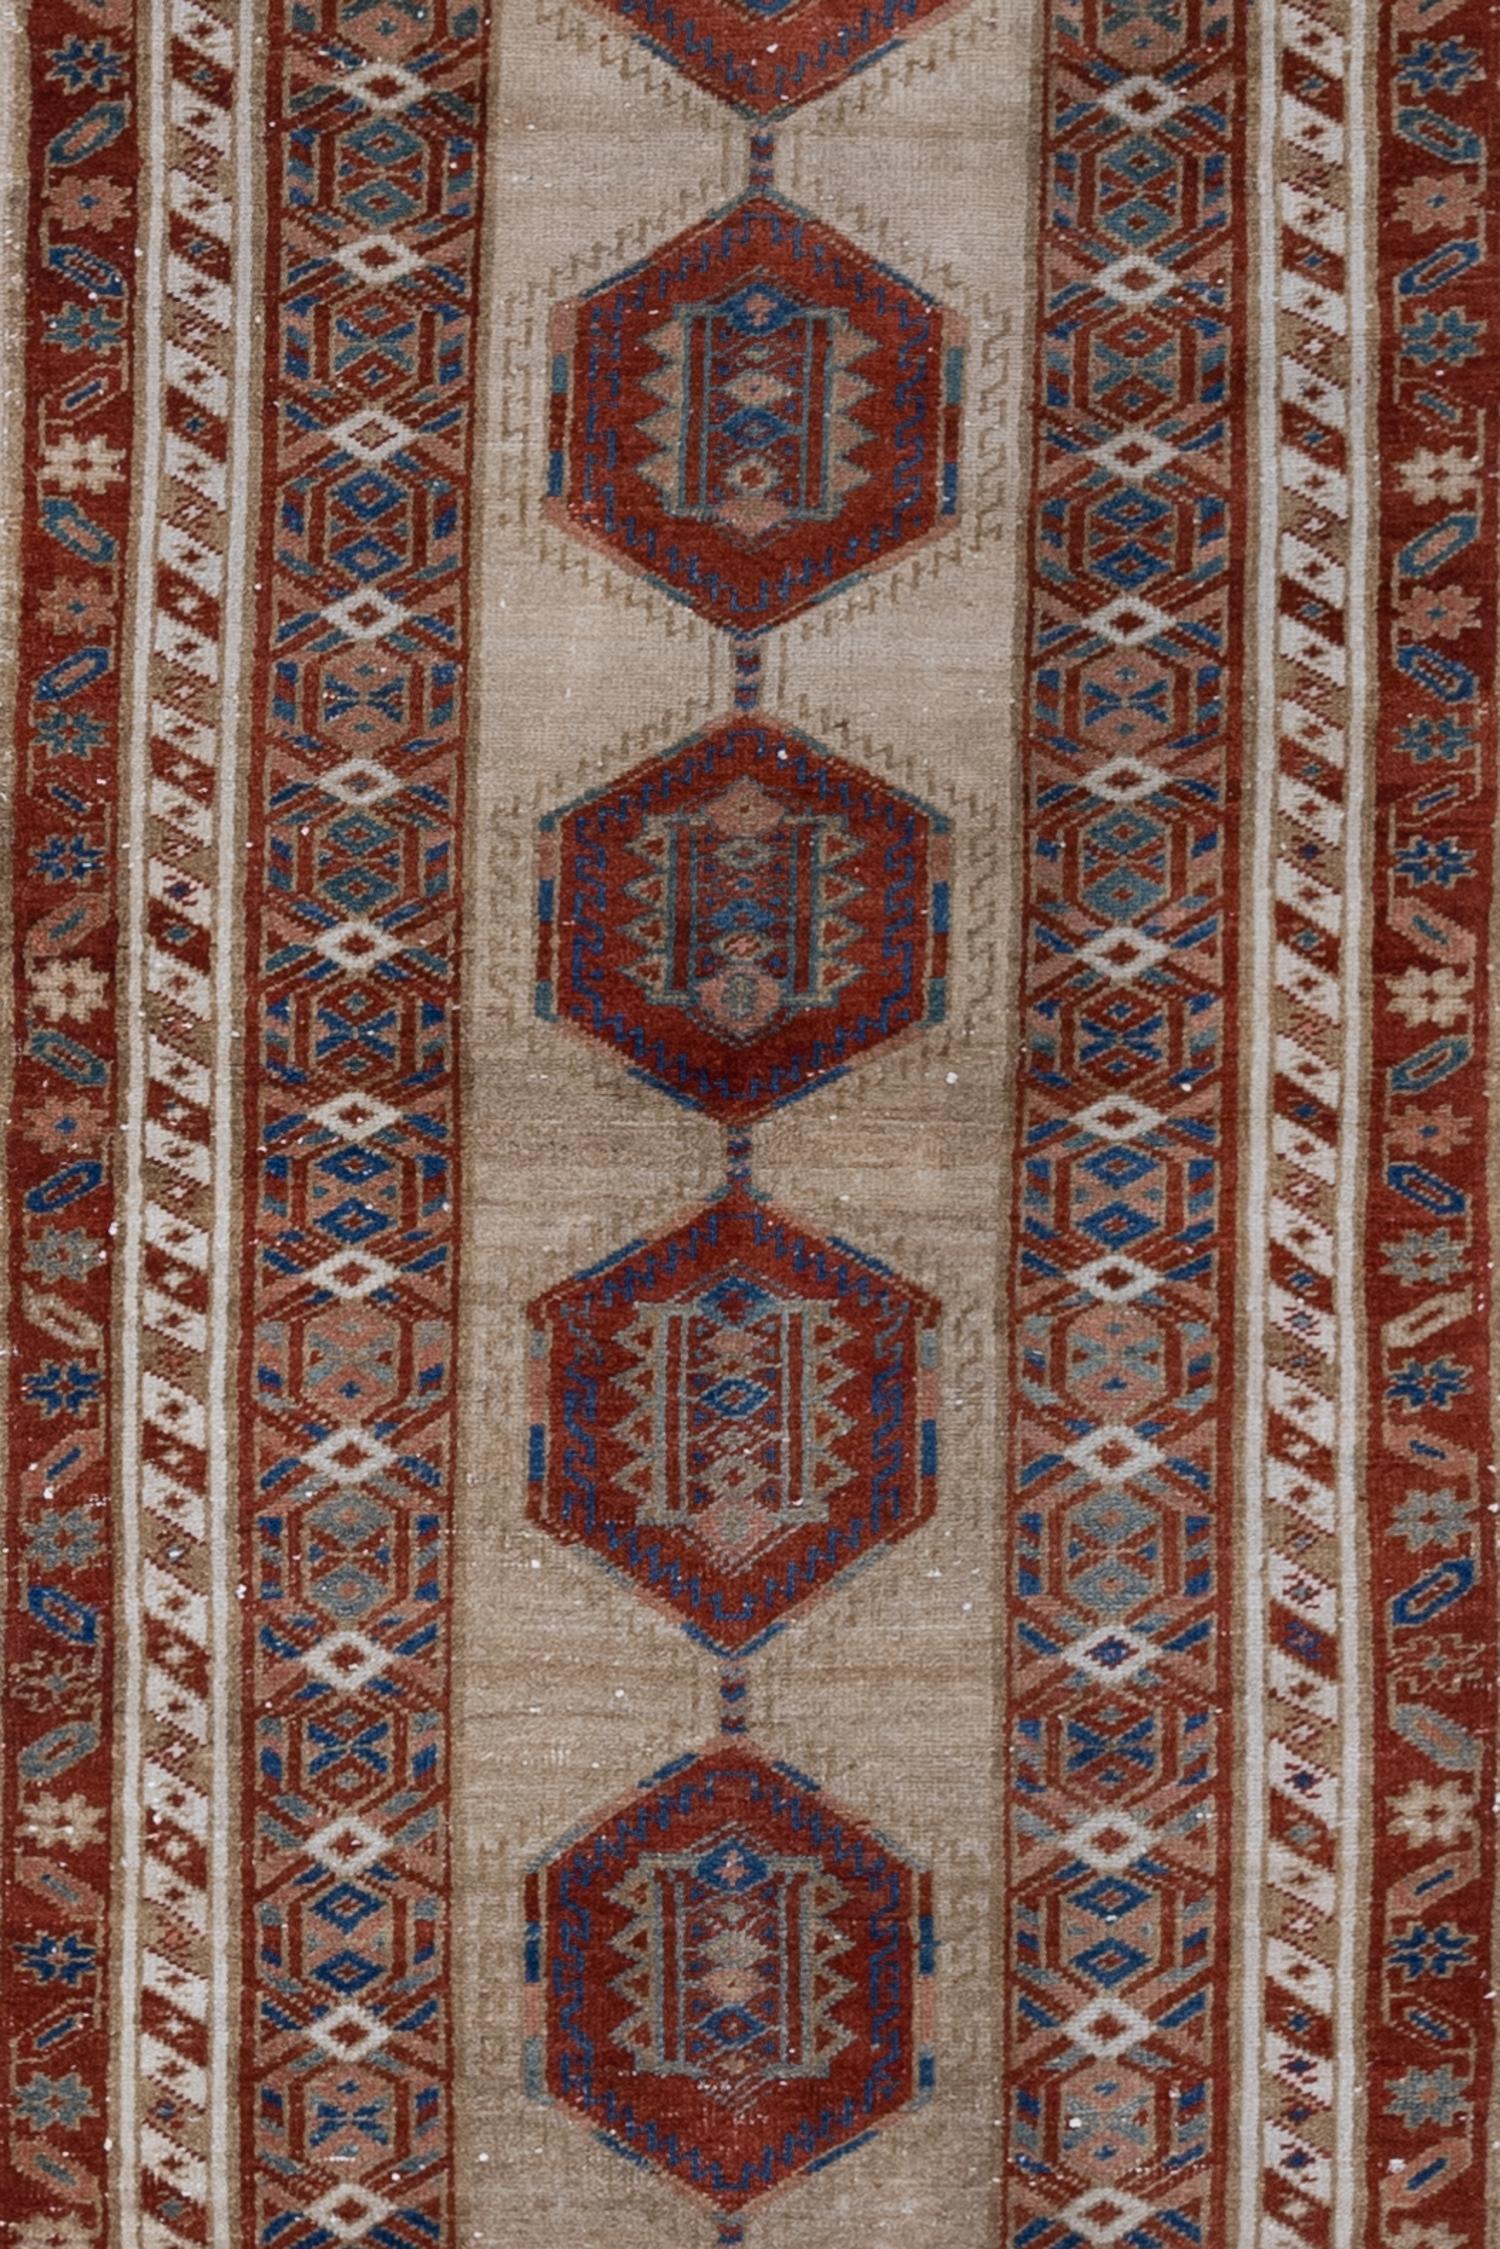 Age: early 20th century 

Colors: wheat, deep red, cobalt, petrol blue 

Pile: low-medium 

Wear Notes: 1

Material: wool on wool

Elegant and simple, this early 20th century camel Serab has a traditional geometric center and classic